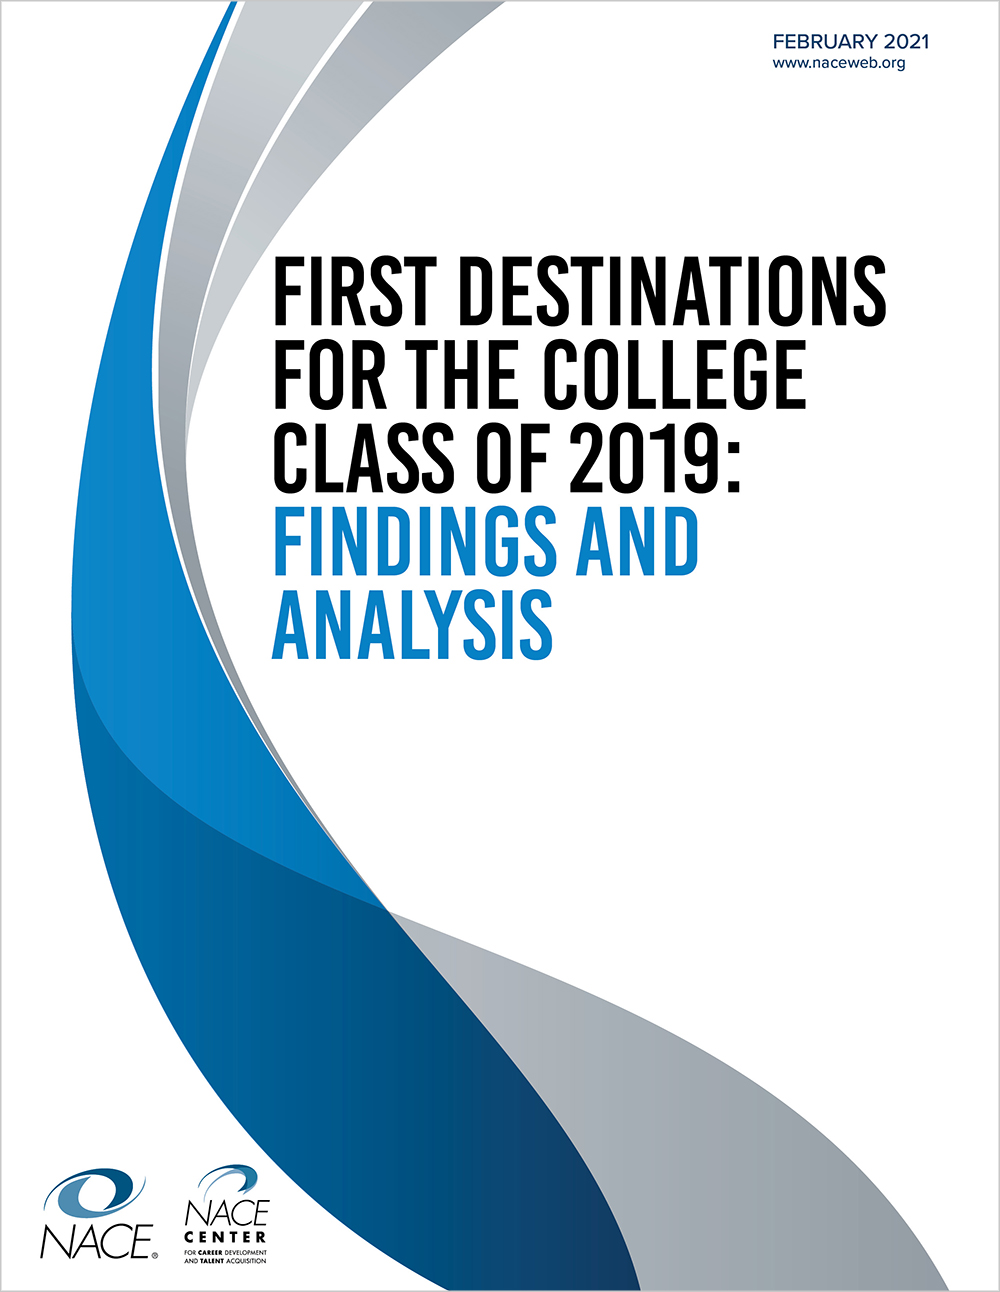 Download the printed report for the First Destinations for the College Class of 2019